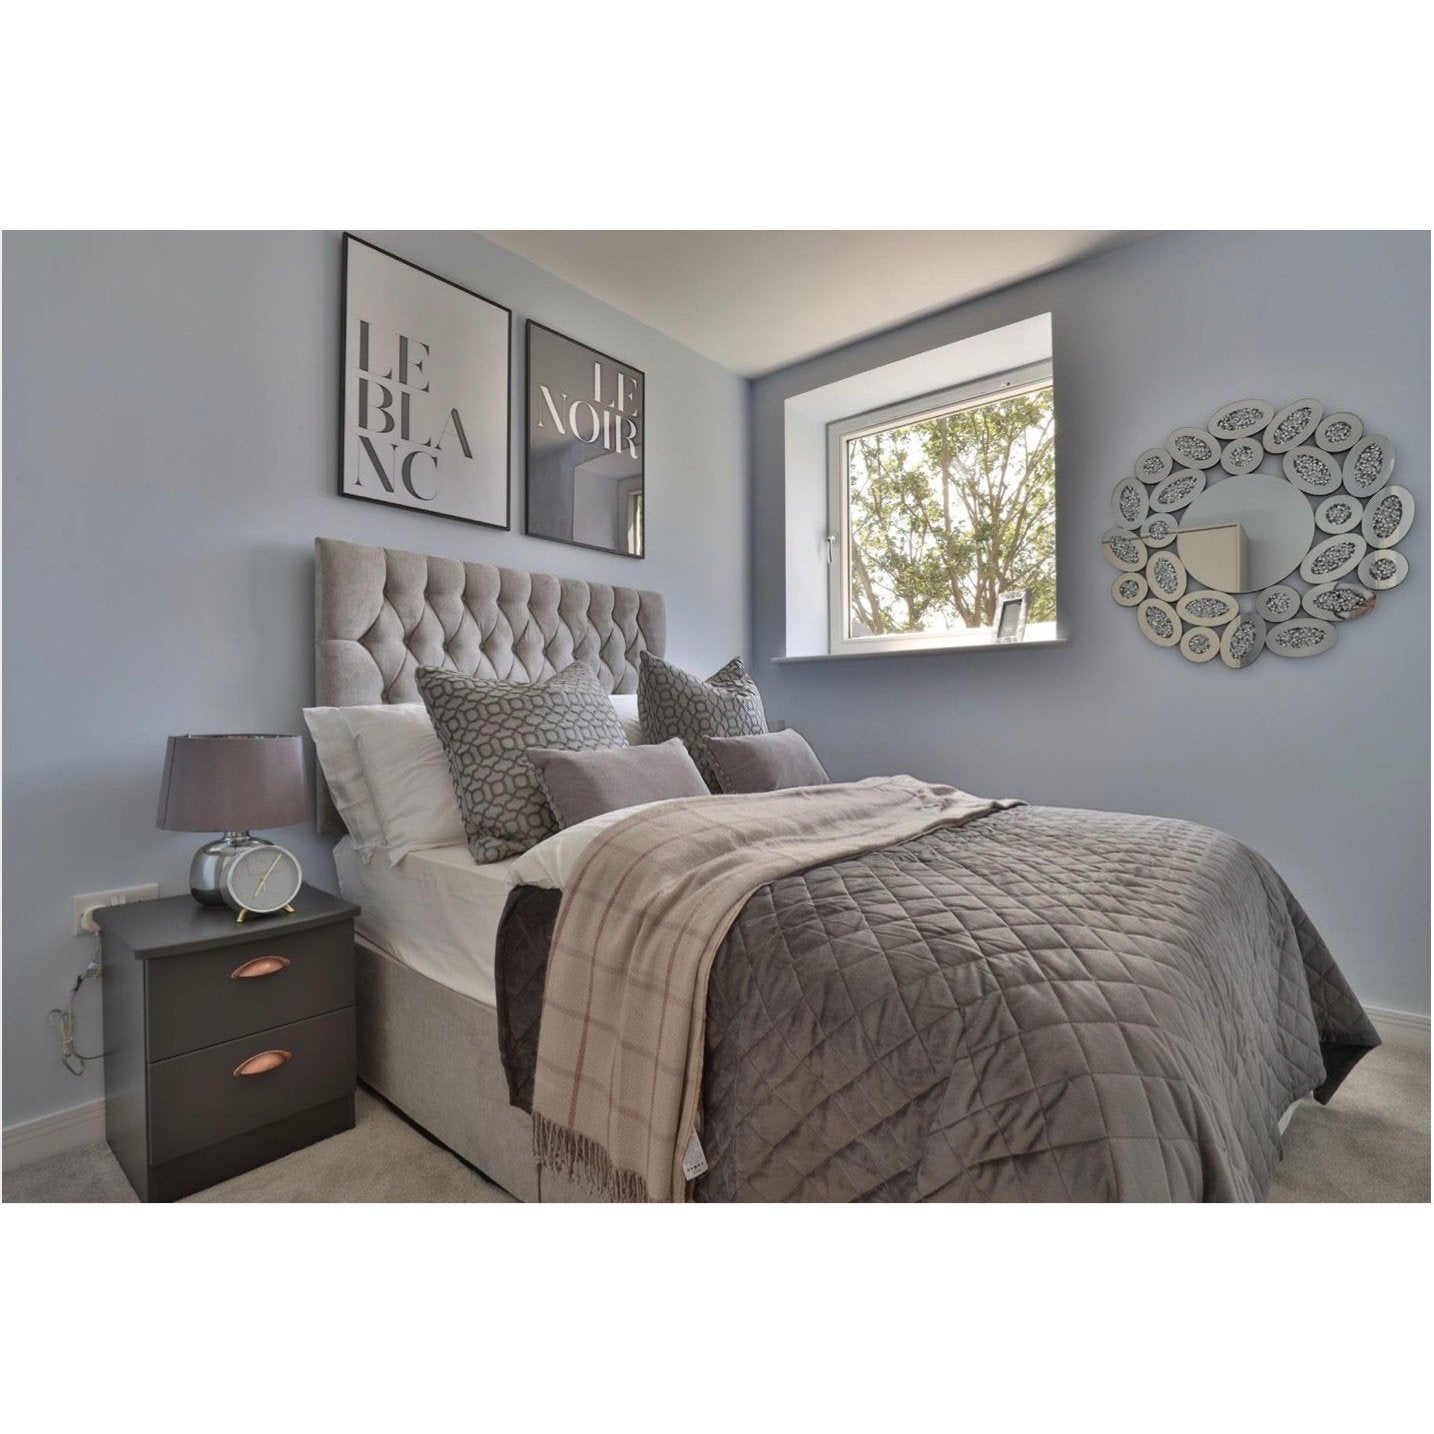 Next day furniture package bedroom | Manor Interiors